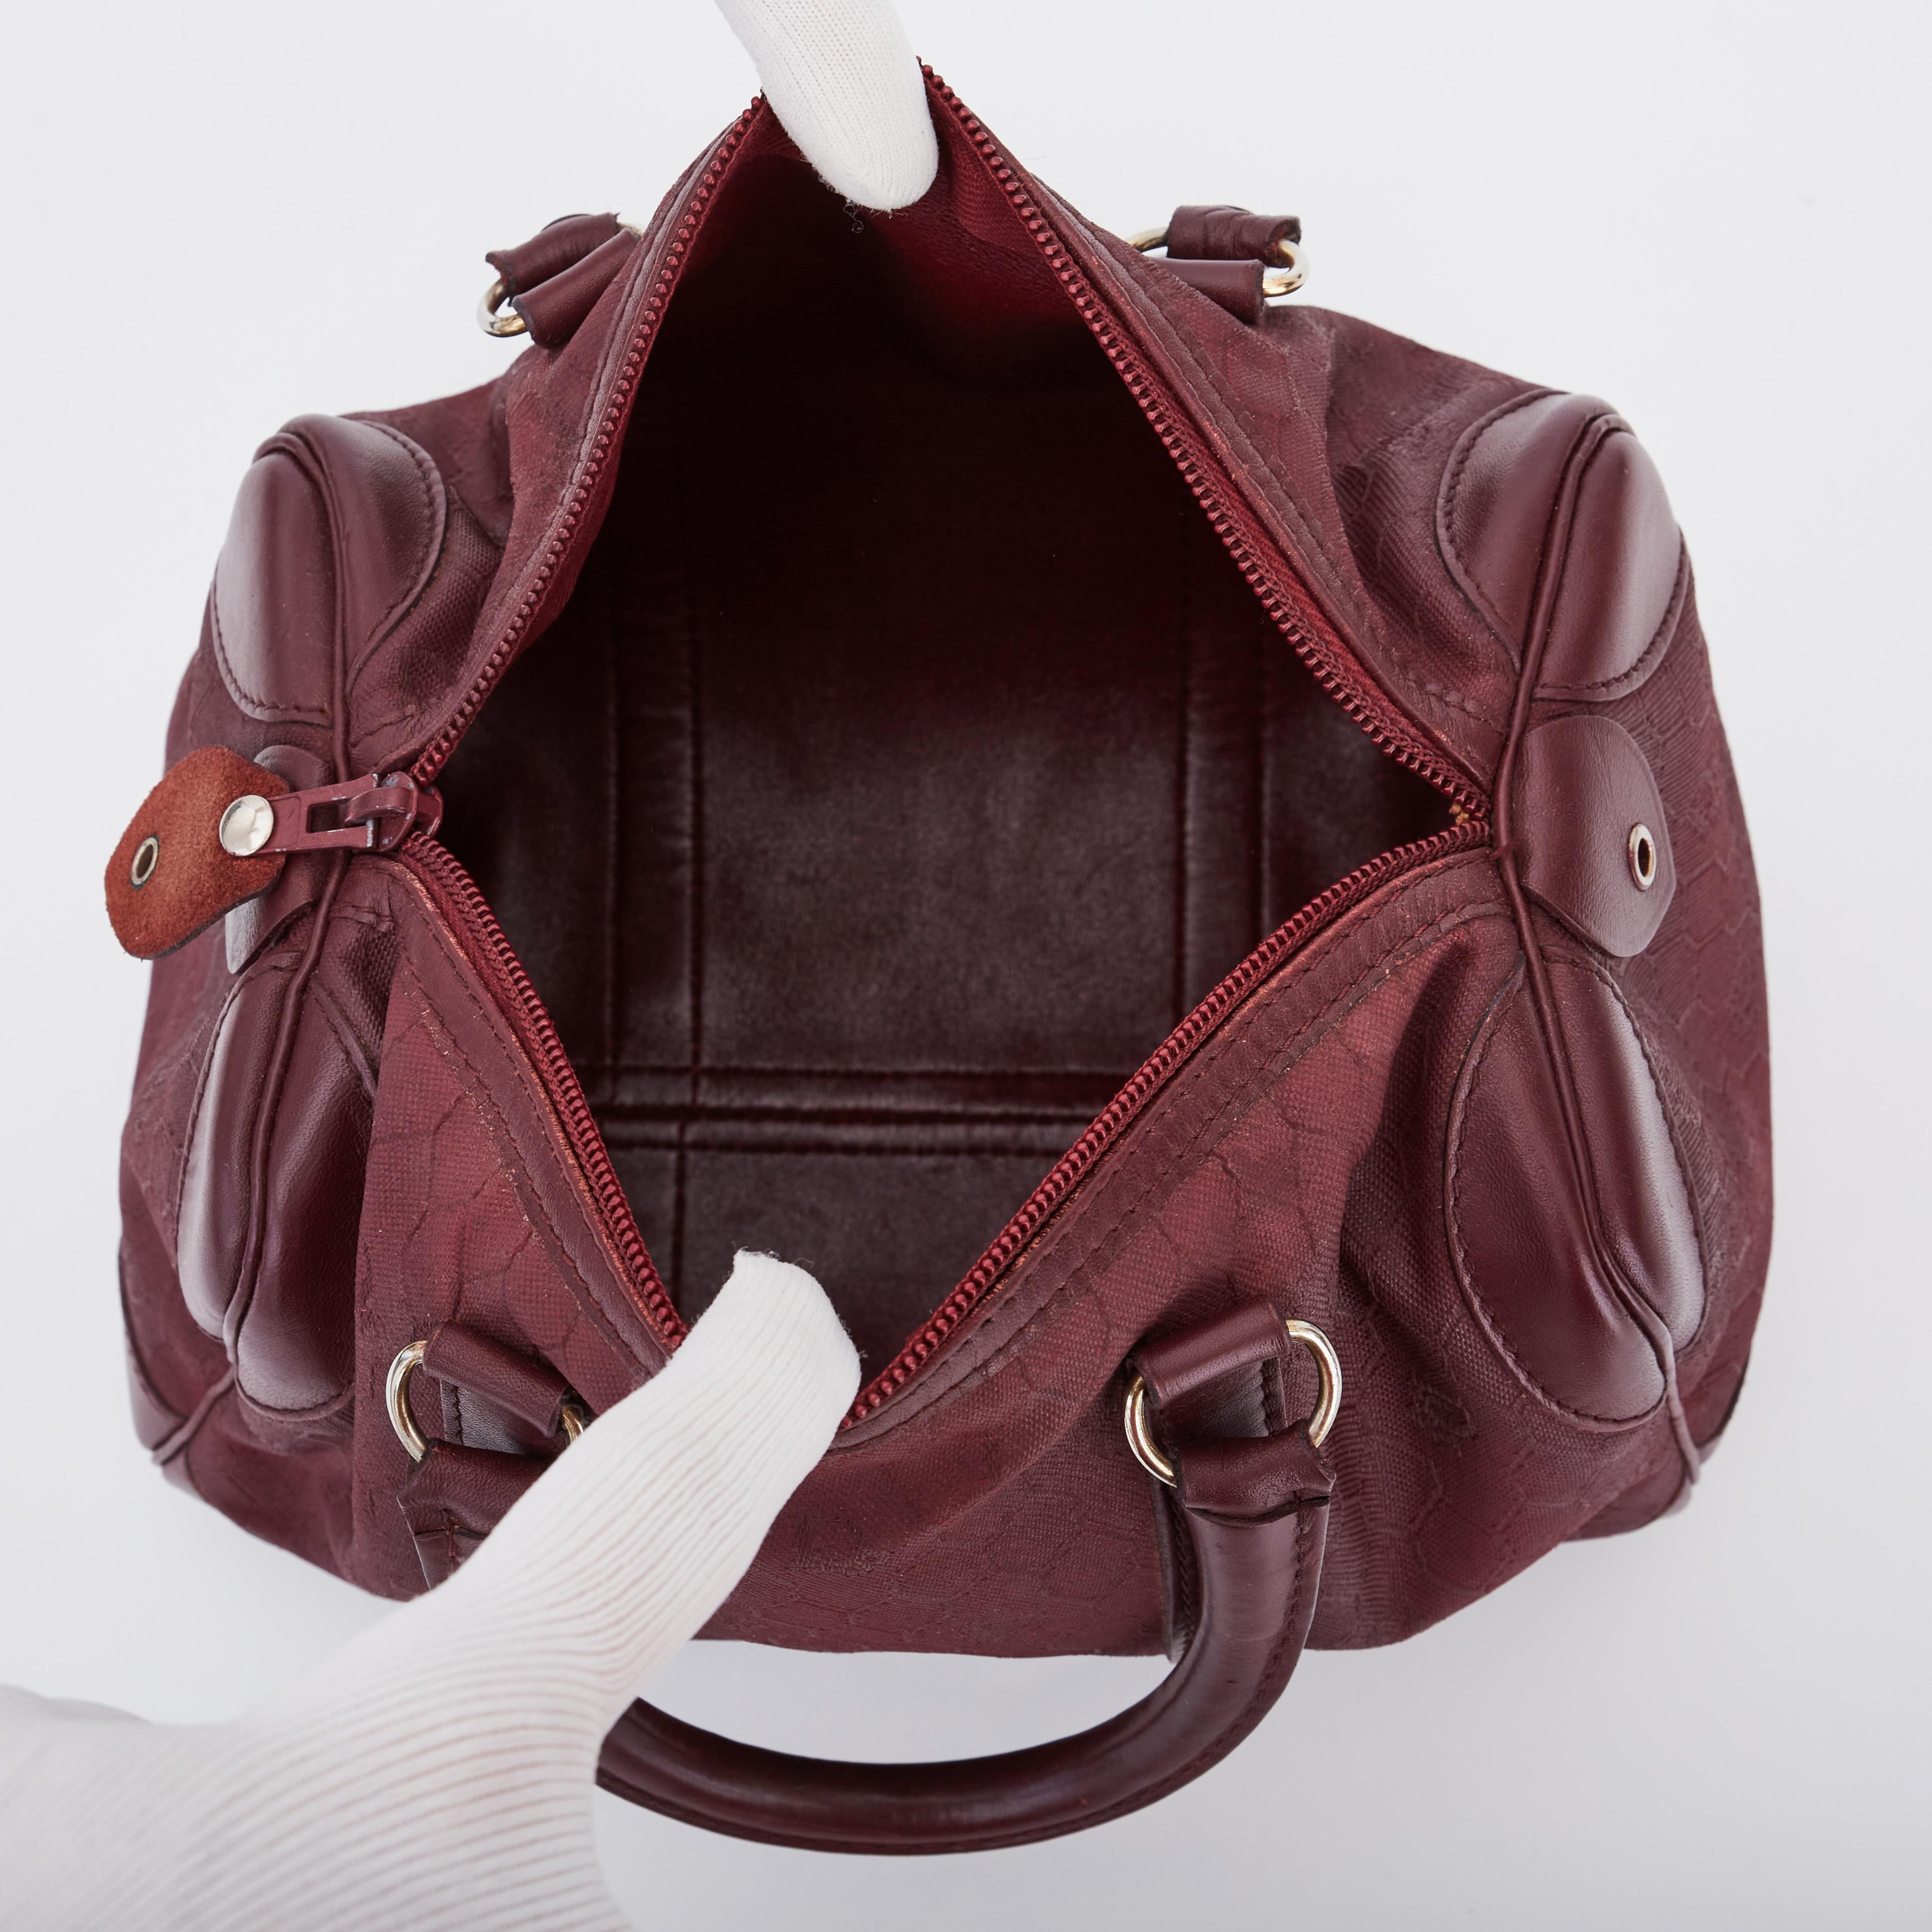 Dior Vintage Burgundy Boston Bowler Bag In Good Condition For Sale In Montreal, Quebec